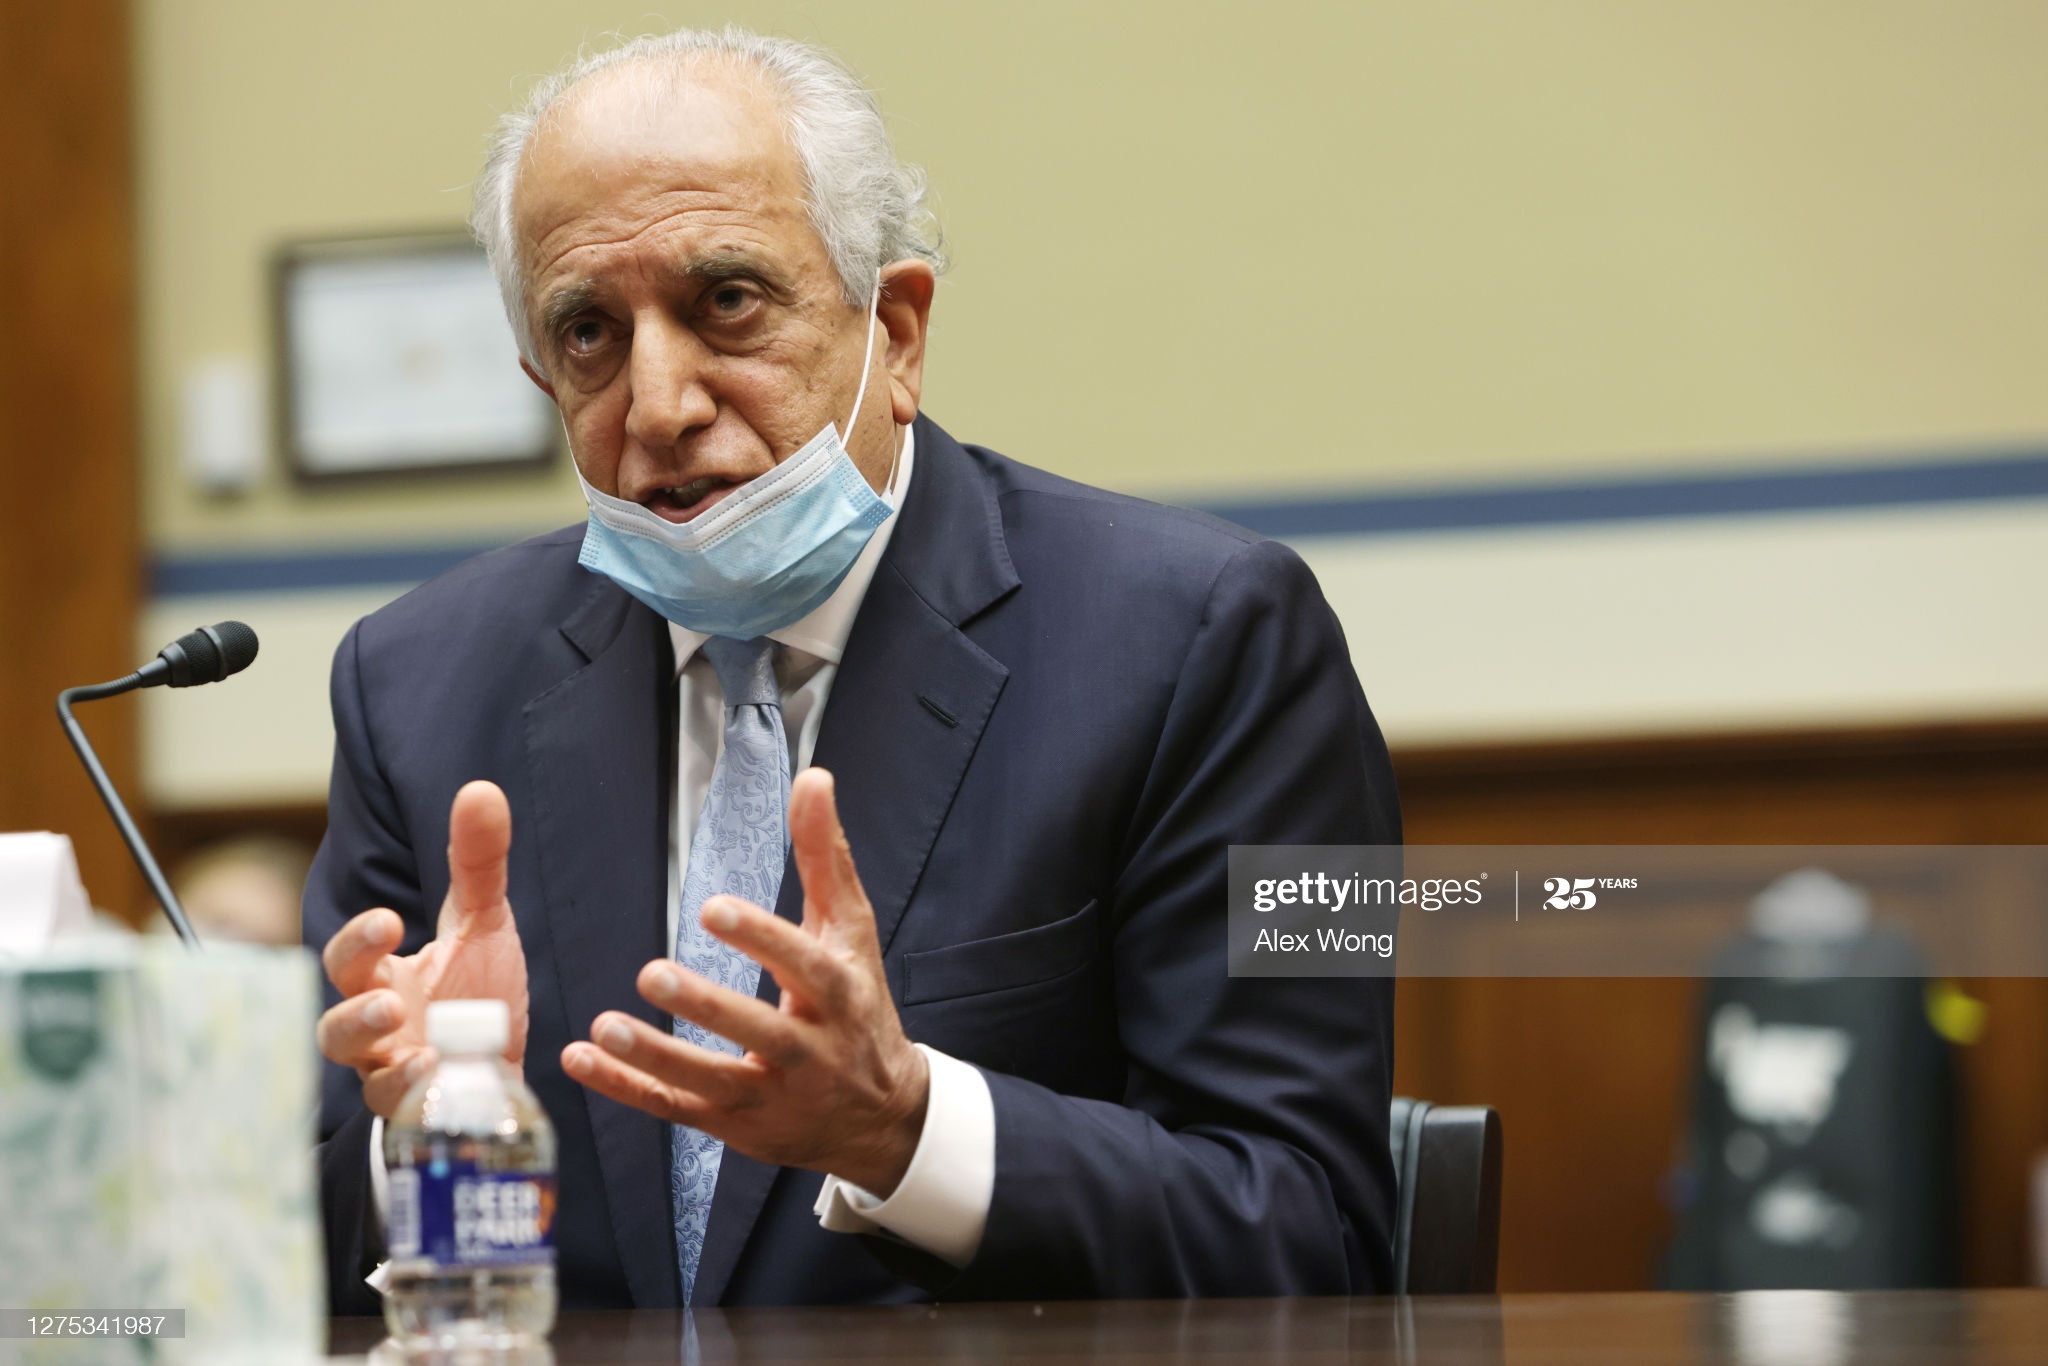 WASHINGTON, DC - SEPTEMBER 22:  U.S. Special Envoy for Afghanistan Zalmay Khalilzad testifies during a hearing before a subcommittee of the House Committee on Oversight and Reform September 22, 2020 on Capitol Hill in Washington, DC. The Afghan government and Taliban are 10 days into talks aimed at ending two decades of war, though the sides remain far apart and the level of violence in the war-torn country is unacceptably high, according to Zhalilzad.  (Photo by Alex Wong/Getty Images)